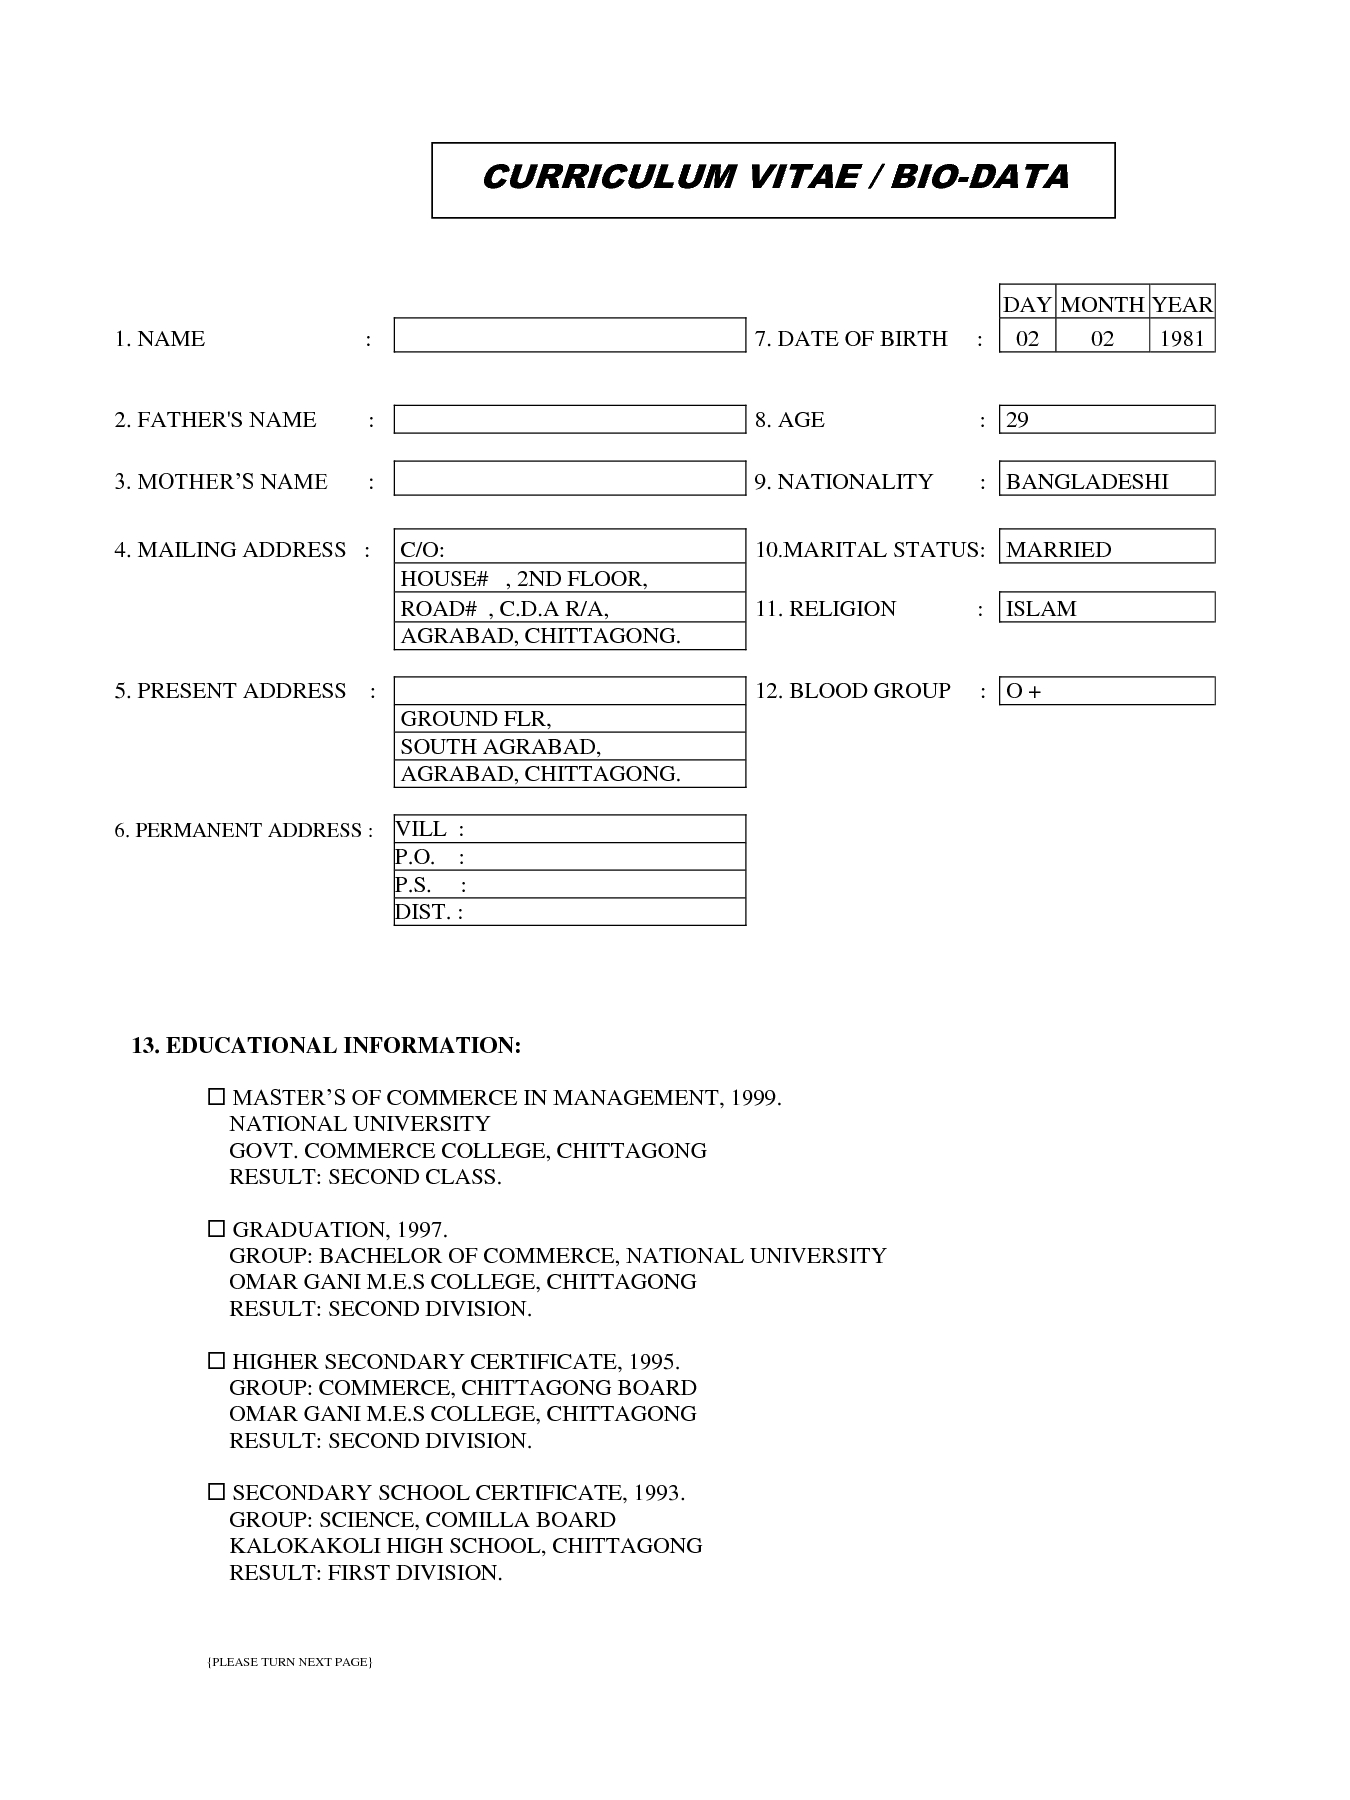 Work Experience Cv Template Year 10 Kjdsx1t2 Good Resume inside measurements 1350 X 1800